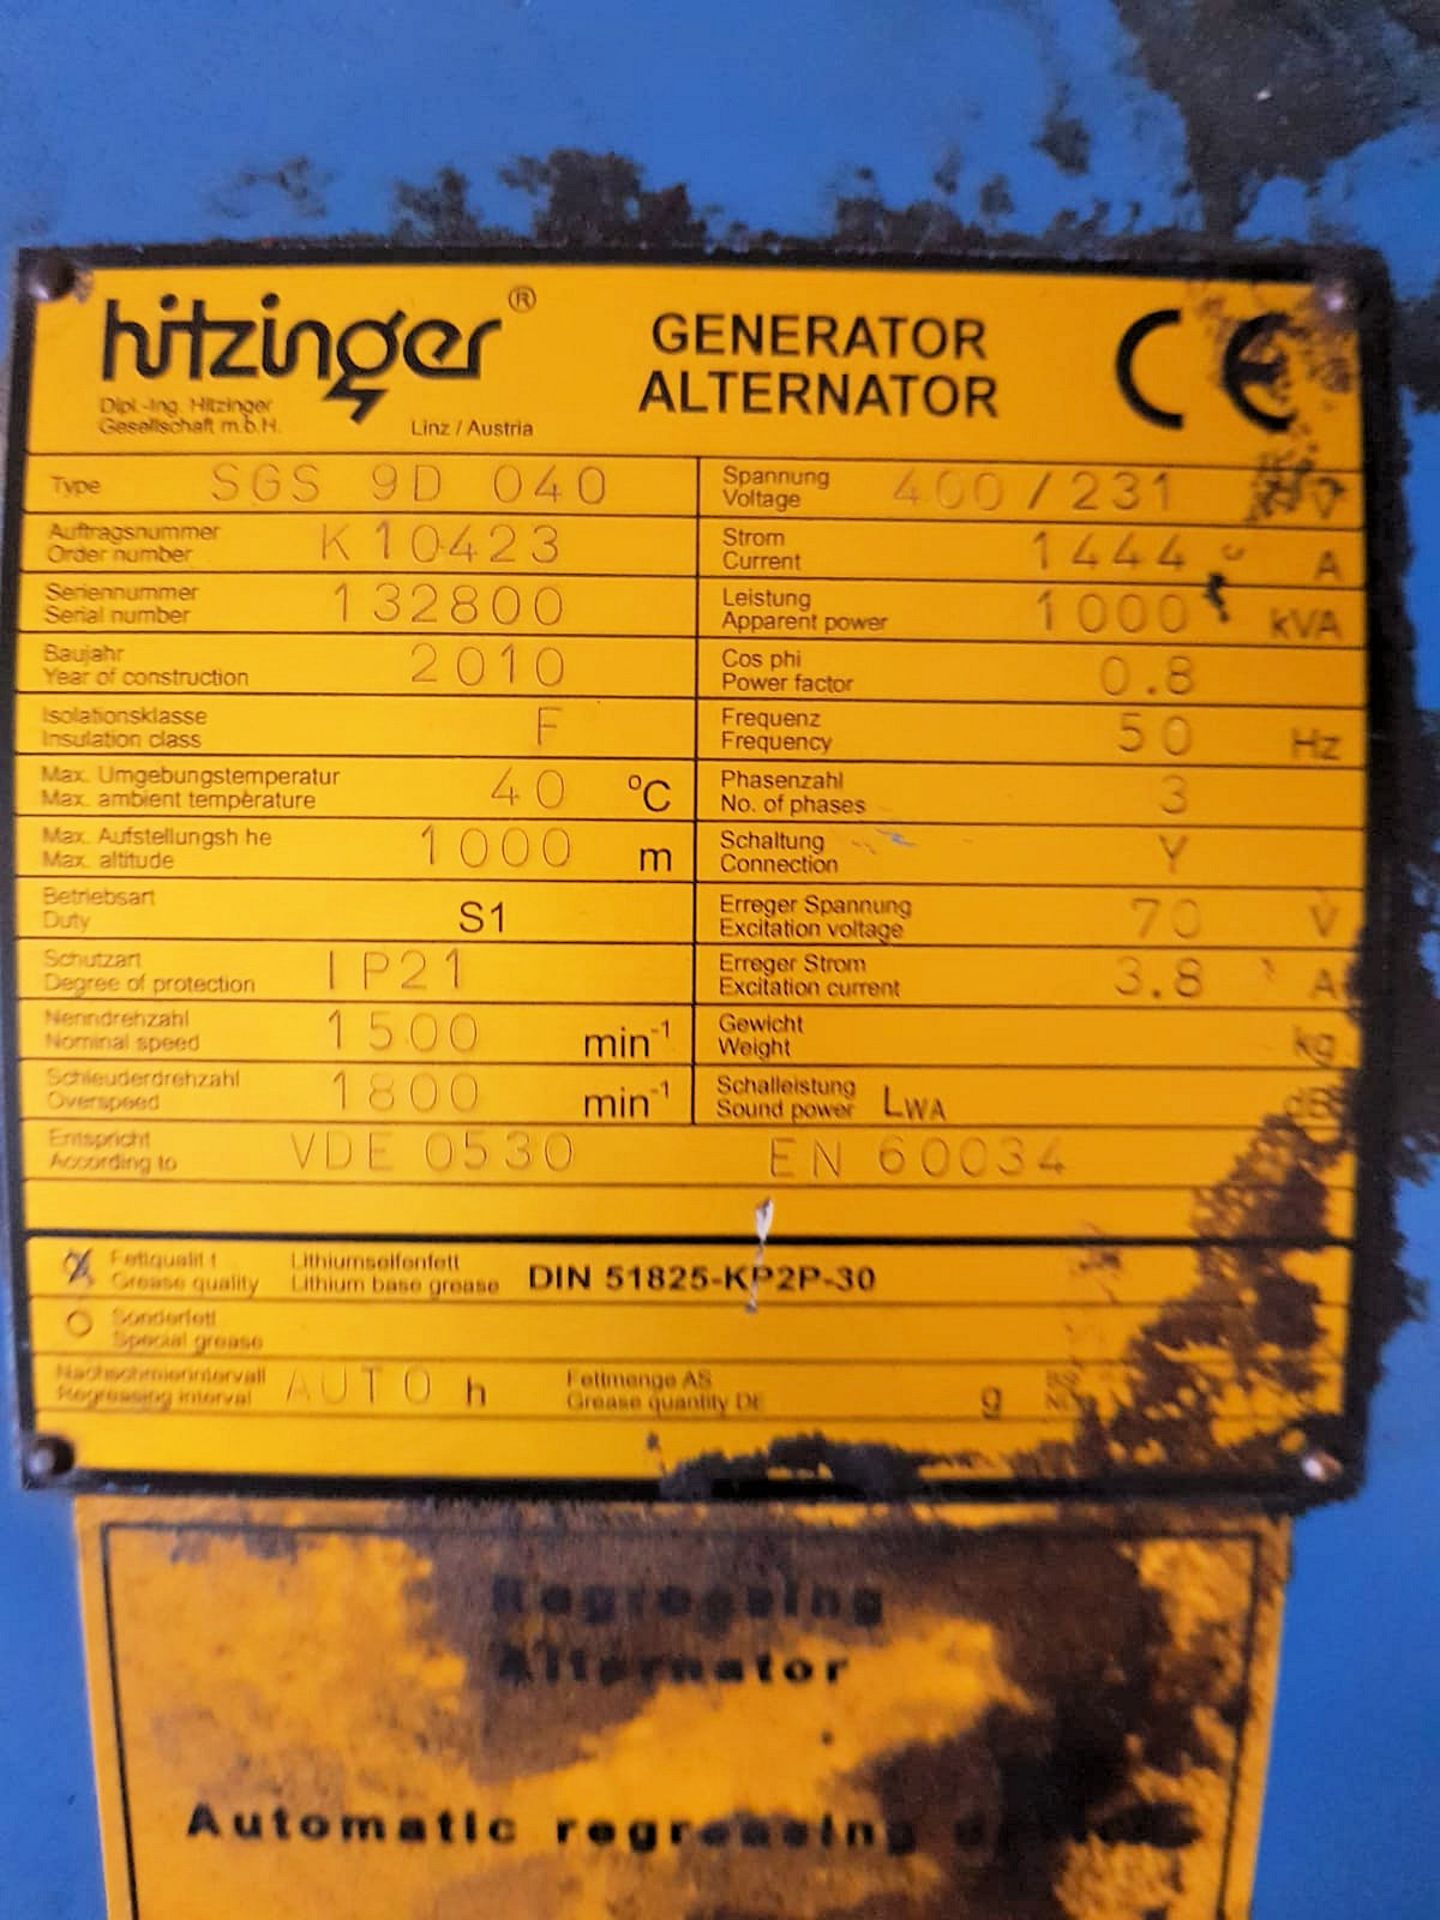 1 x 1987 Hitzinger SGS 9D 040 Generator - Only 800 Hours Use - Ref: T4UB/HZ - CL333 - Location: - Image 20 of 20